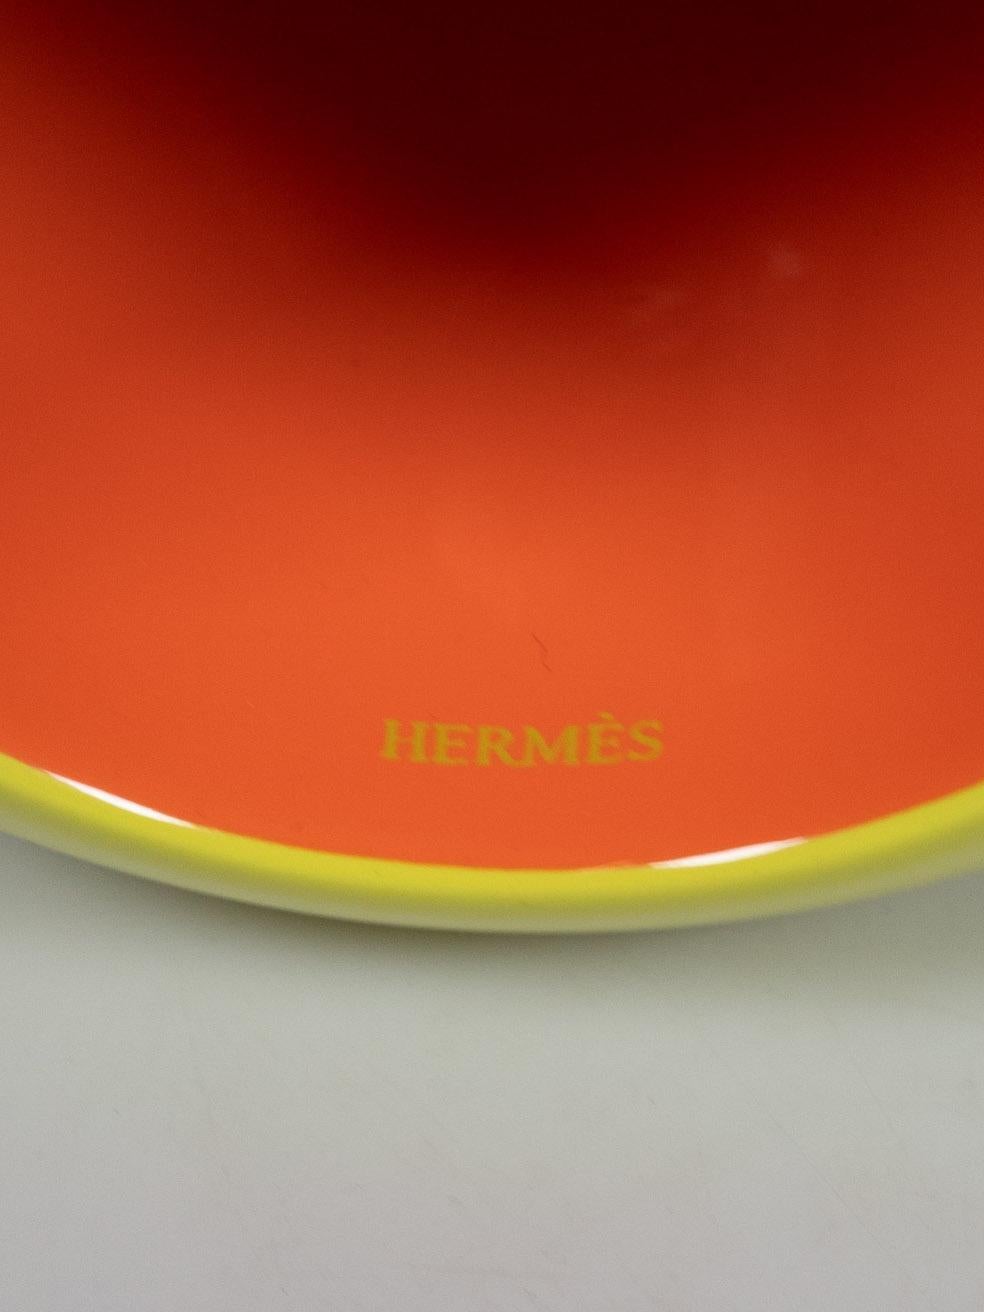 Hermes Yellow Rounded Bangle For Sale 1